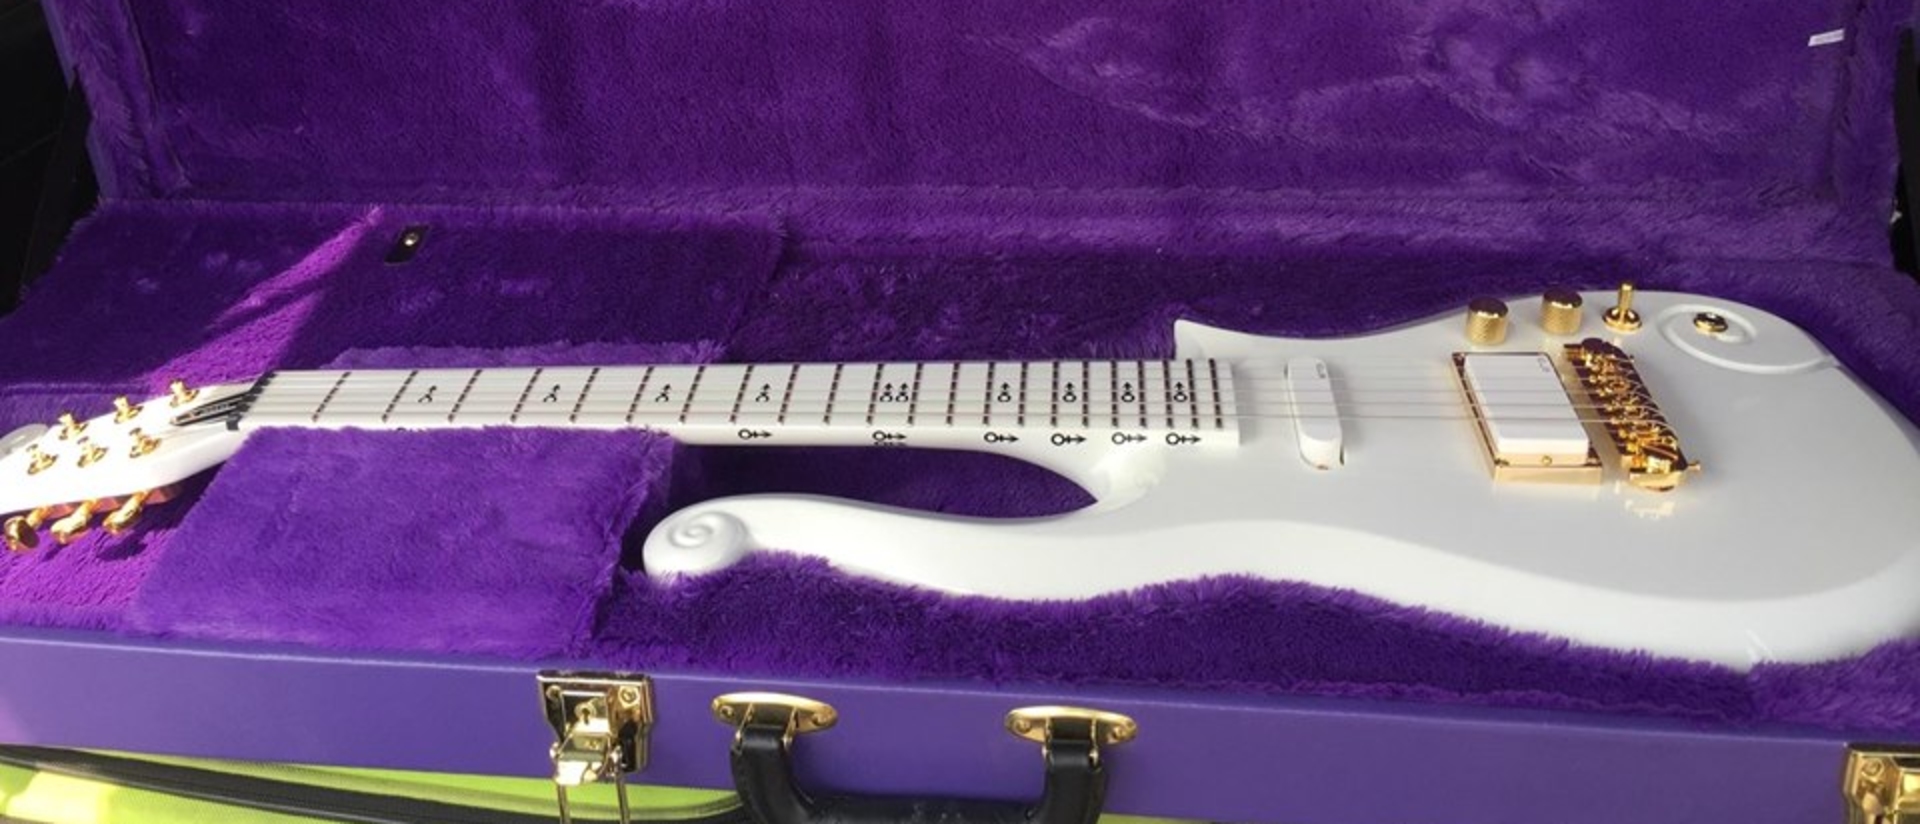 A guitar from the collection of the late superstar Prince. 